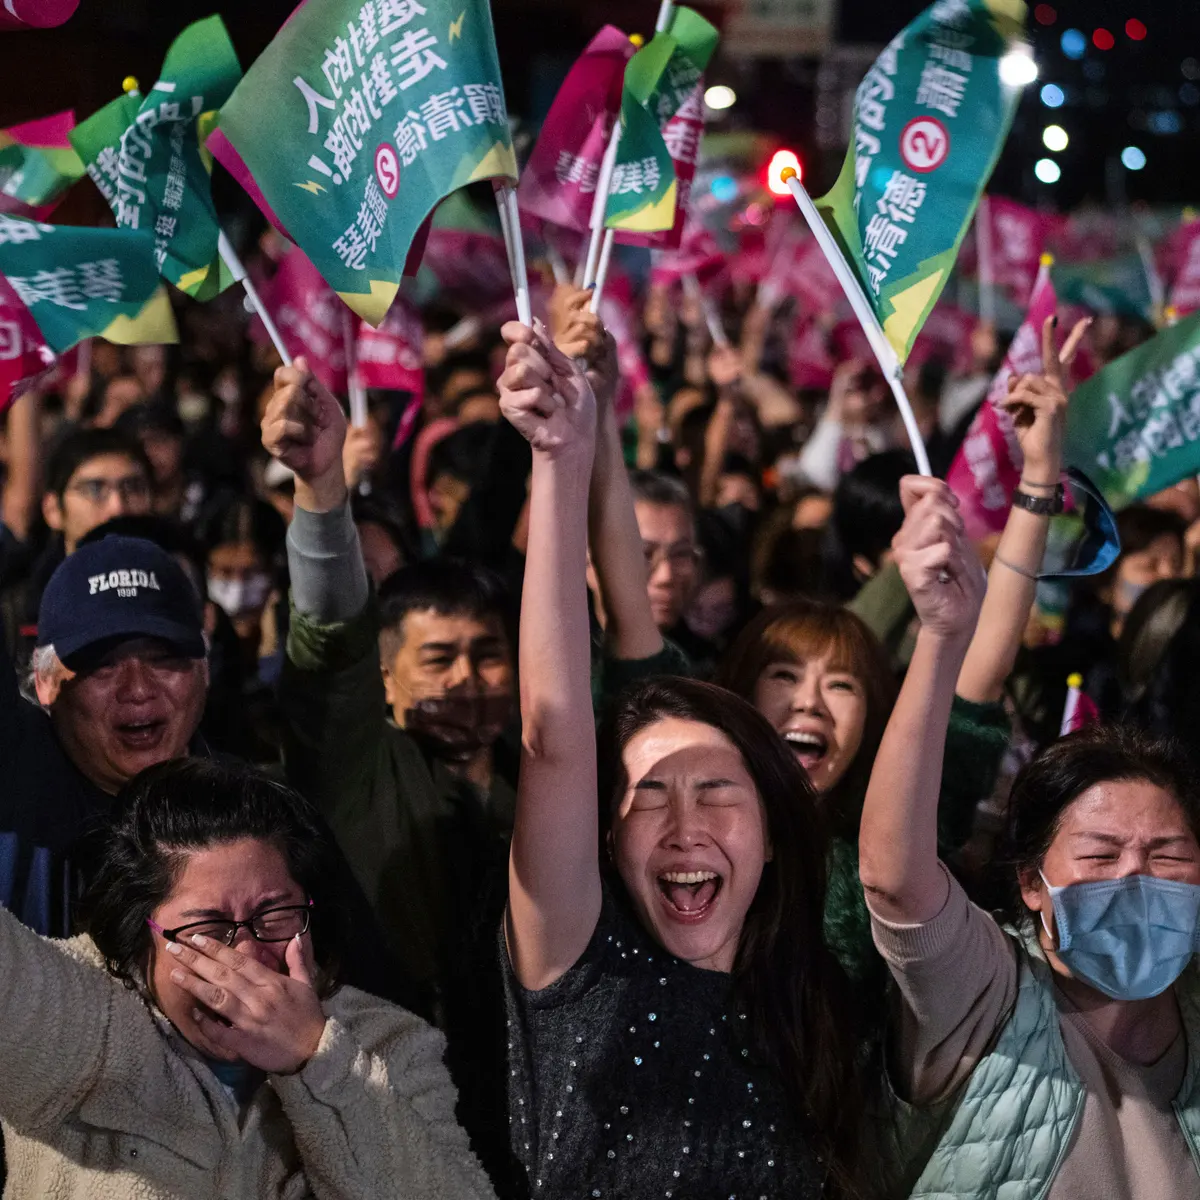 People cheer at a Democratic Progressive party rally in Taipei after ruling DPP party candidate Lai Ching-te won Saturday’s election.